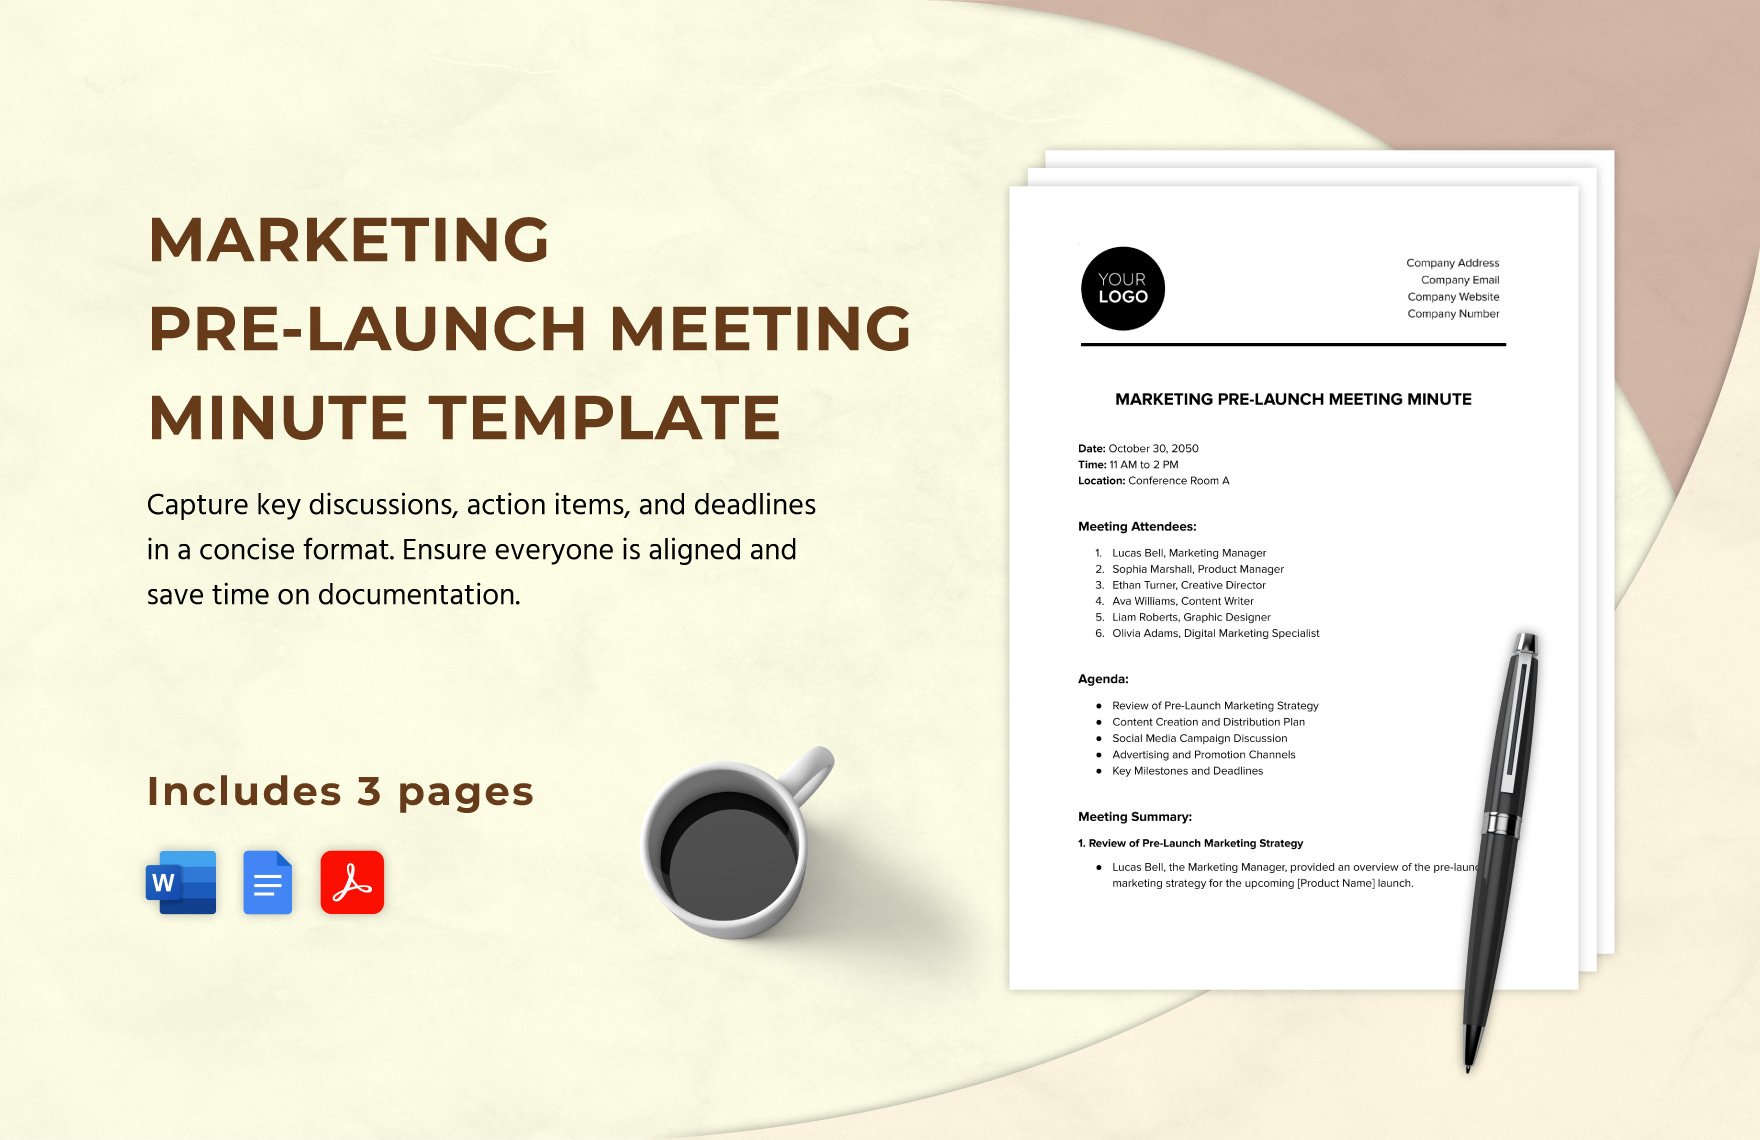 Marketing Pre-Launch Meeting Minute Template in Word, Google Docs, PDF